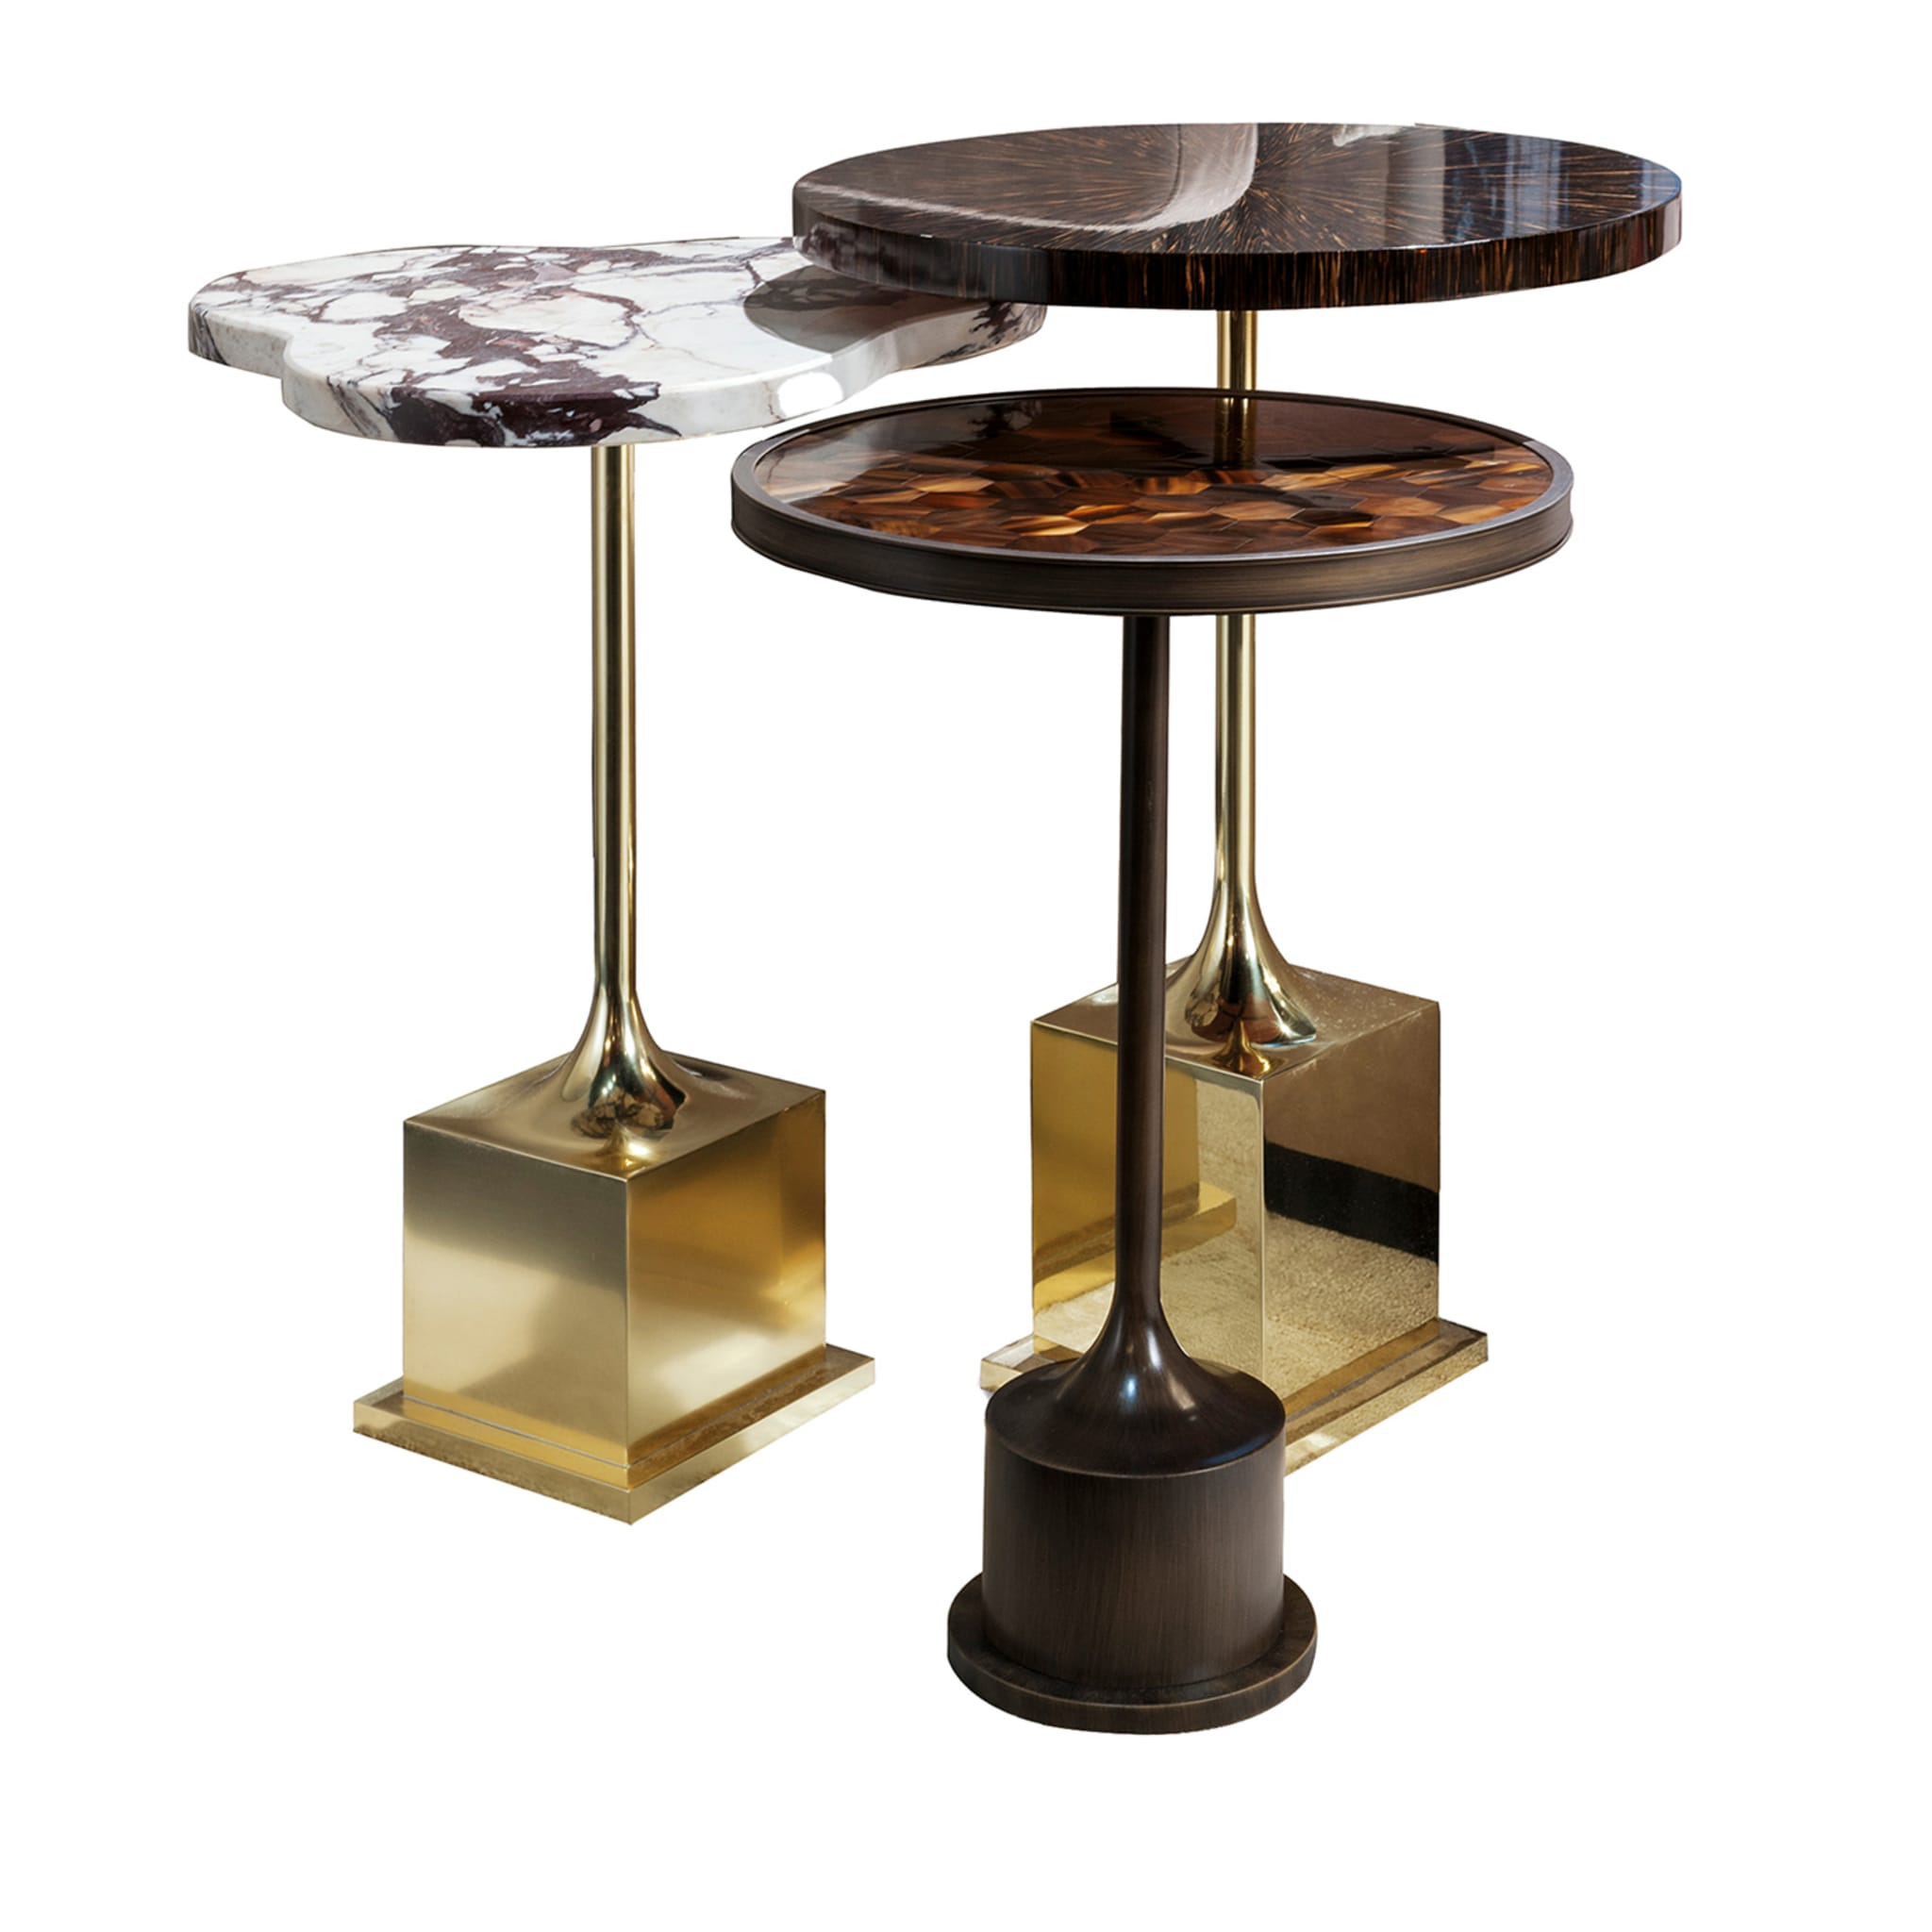 Set of 3 Side Tables - Main view